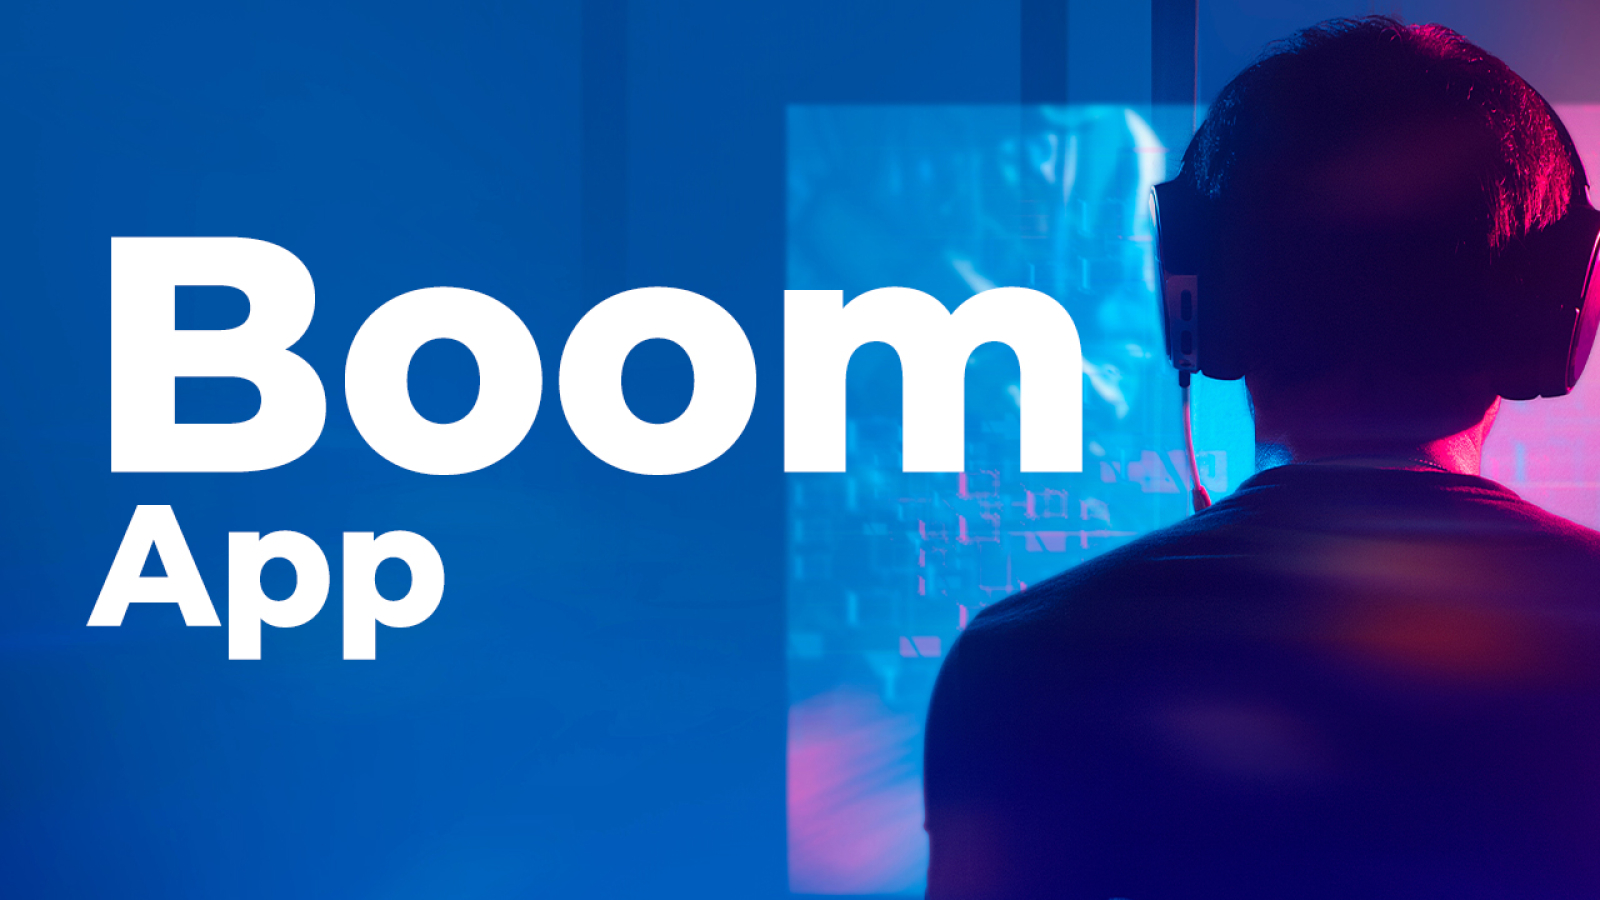 Boom App Launches PC Version and Partners with OKC; NFT Airdrop Coming Soon